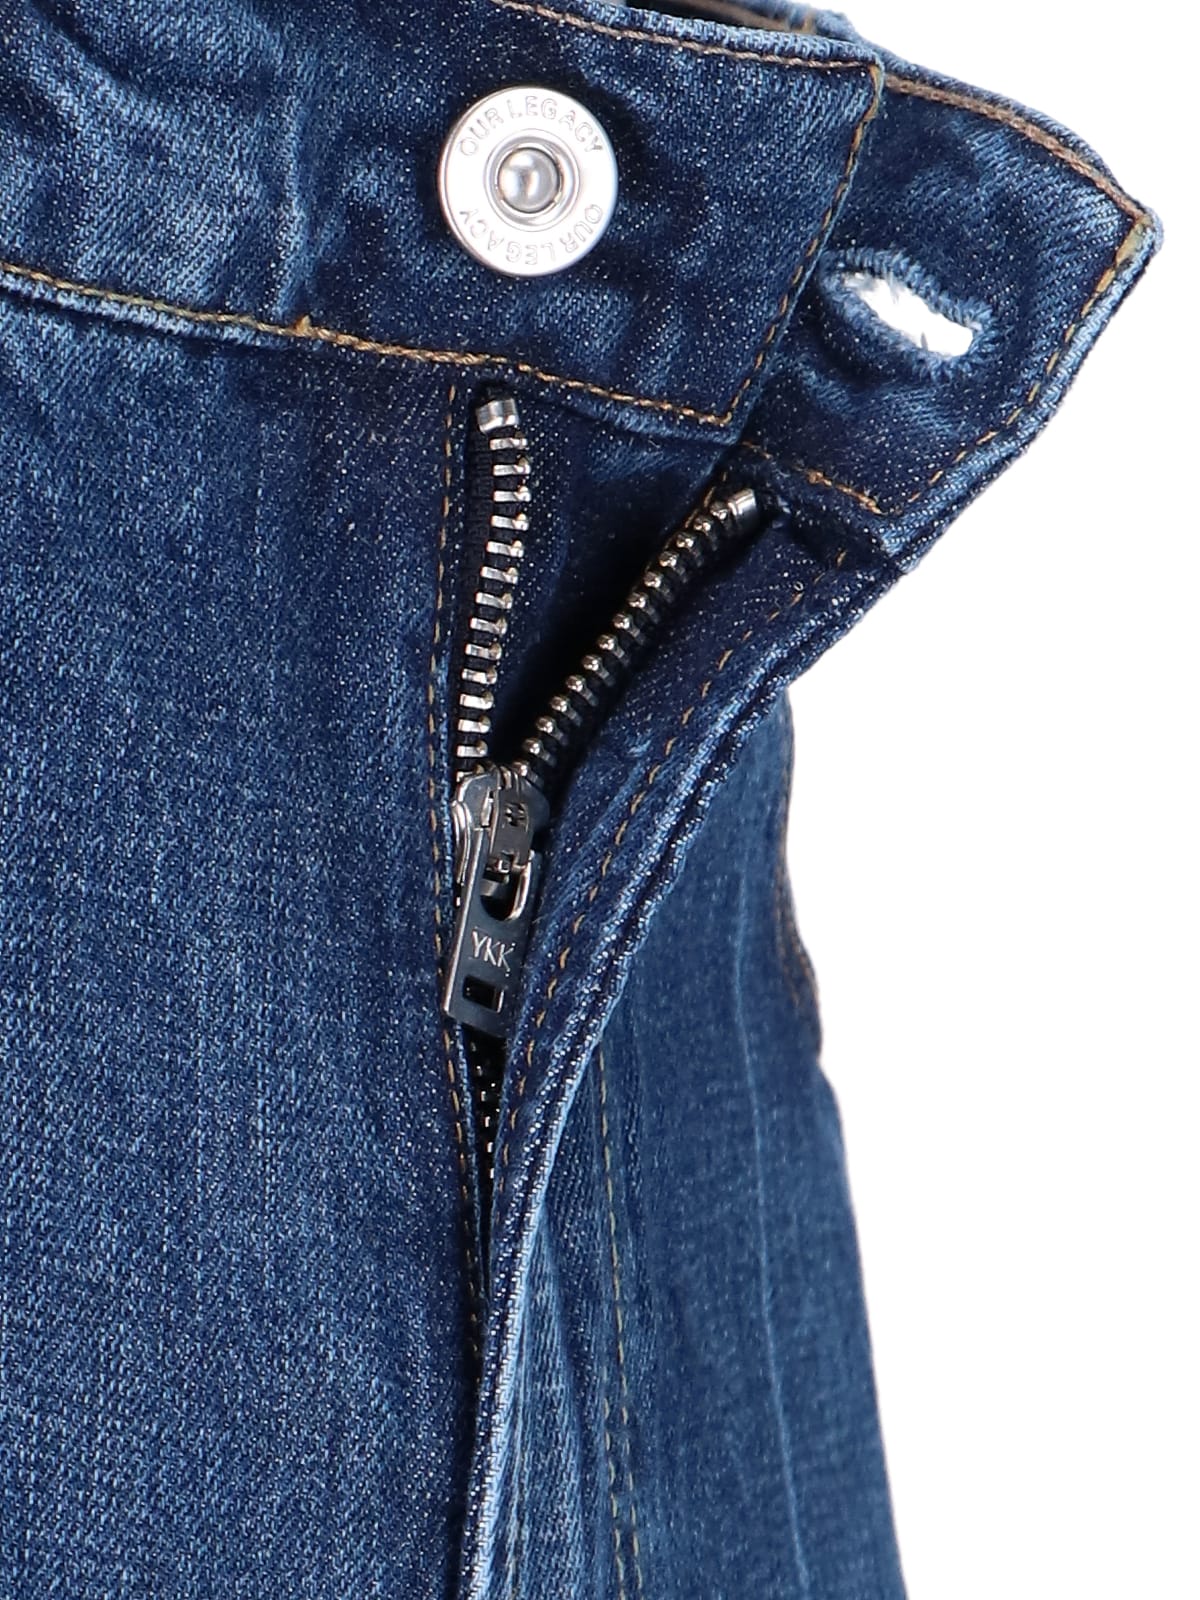 Shop Our Legacy 70s Cut Jeans In Blue